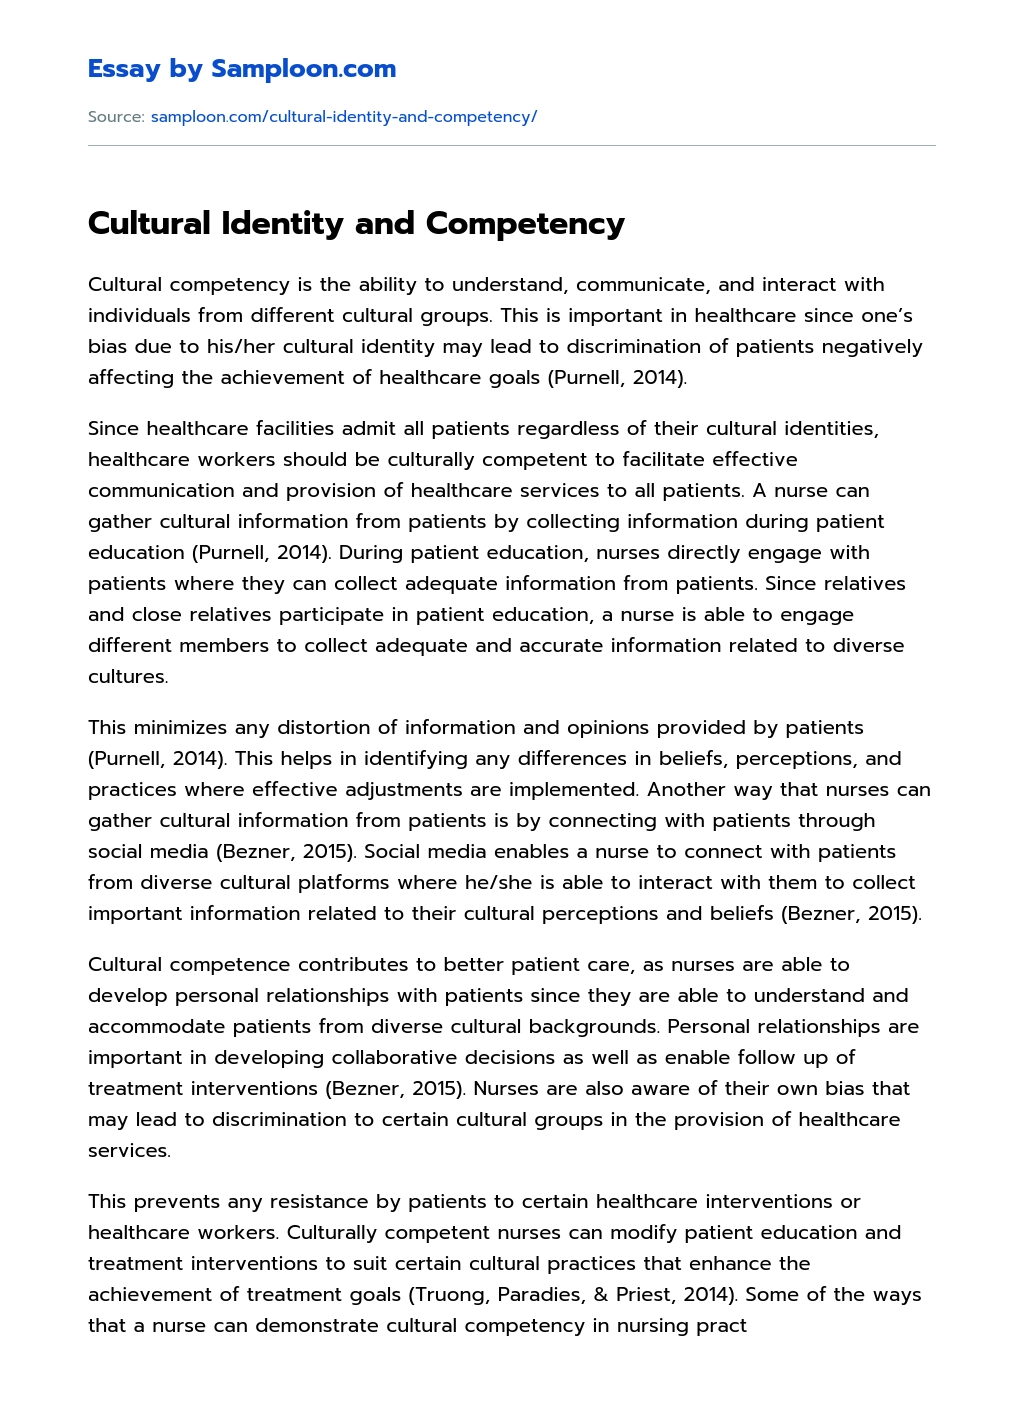 Cultural Identity and Competency essay